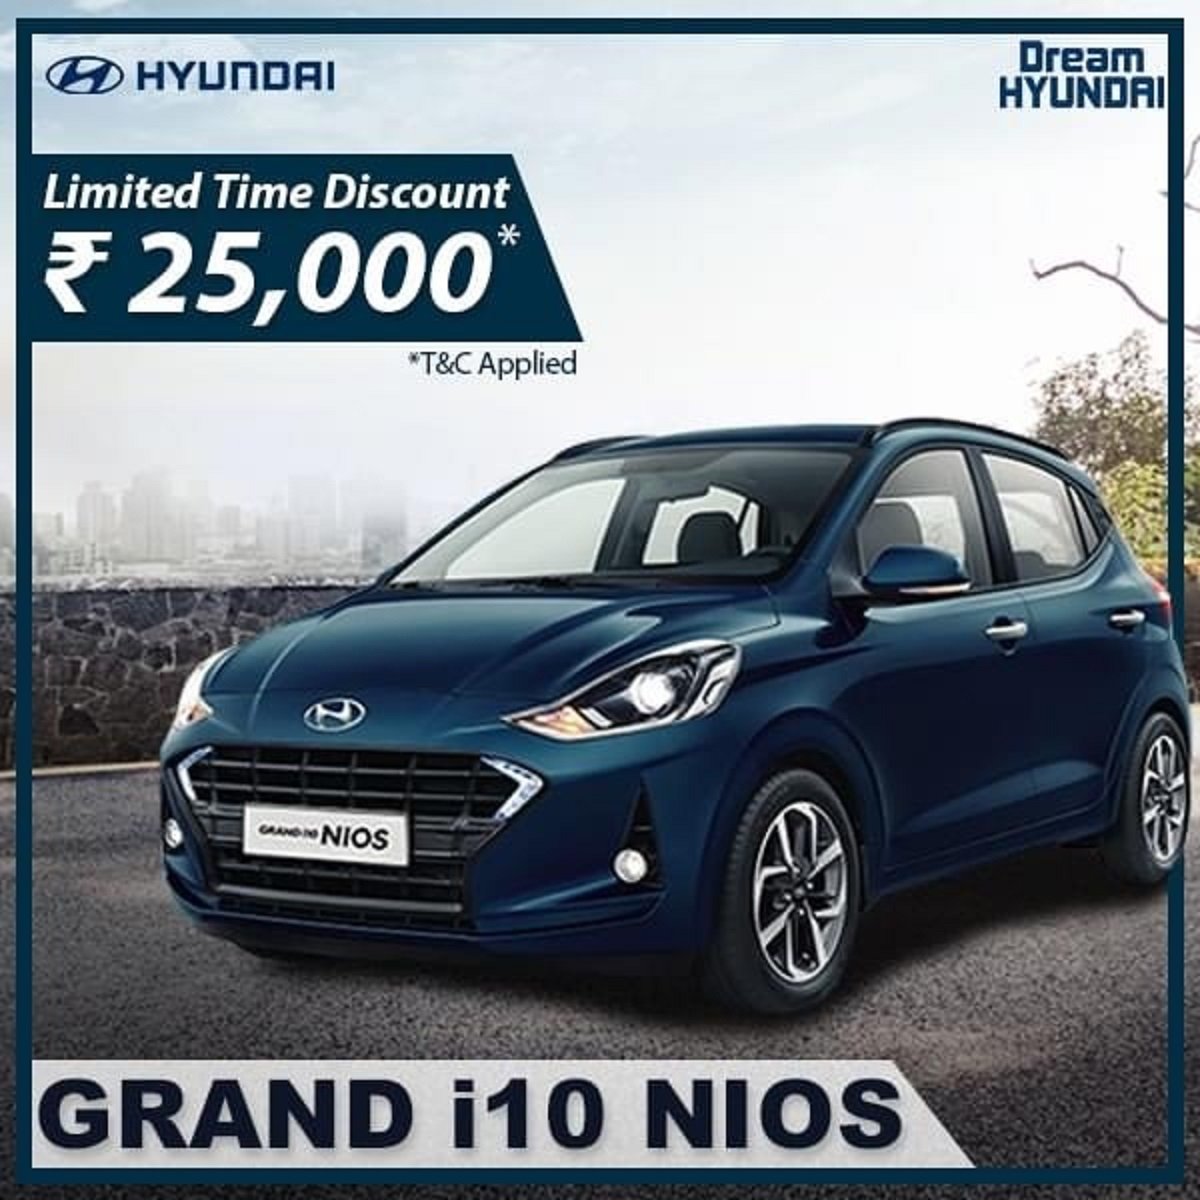 Hyundai Offering Discounts Of Upto Rs. 25,000 On Grand i10 Nios